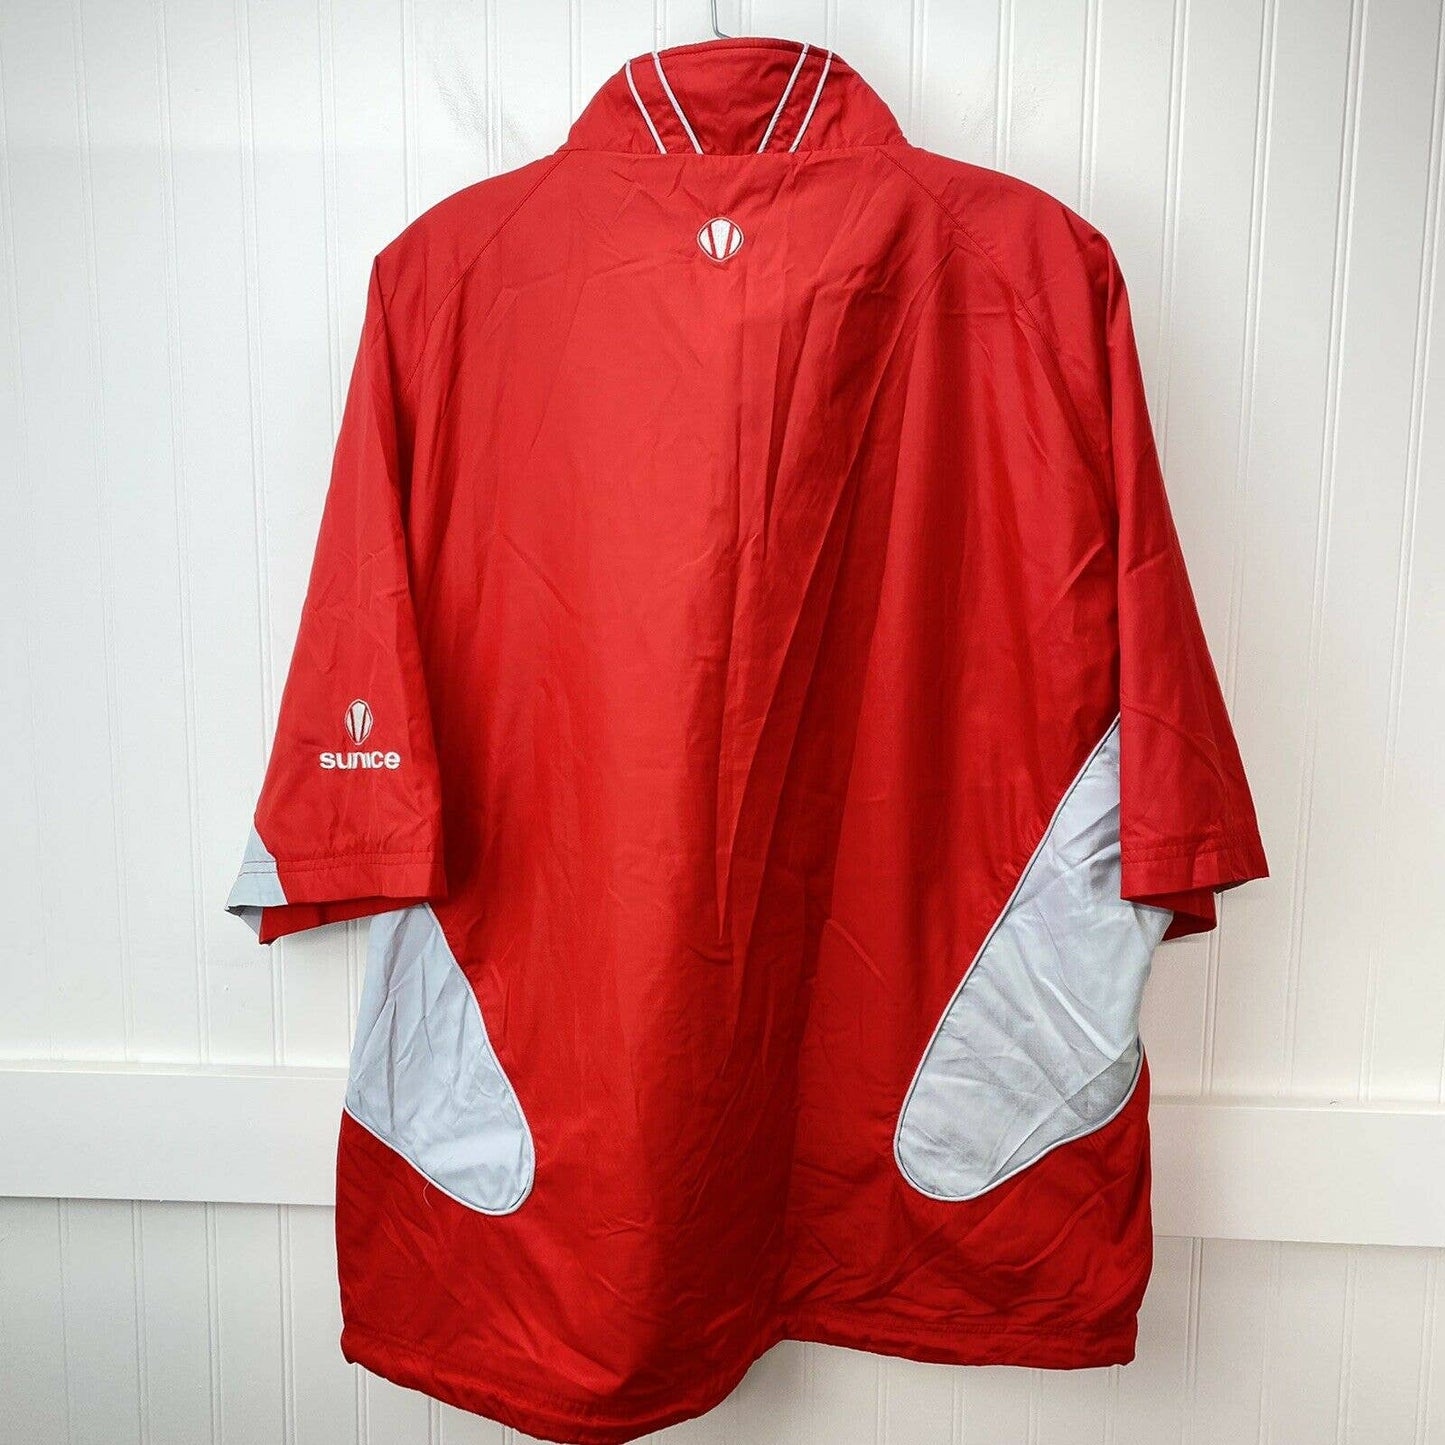 Sunice 1/4 Zip Pullover Short Sleeve Weather Jacket XLarge Red Lightweight *Flaw